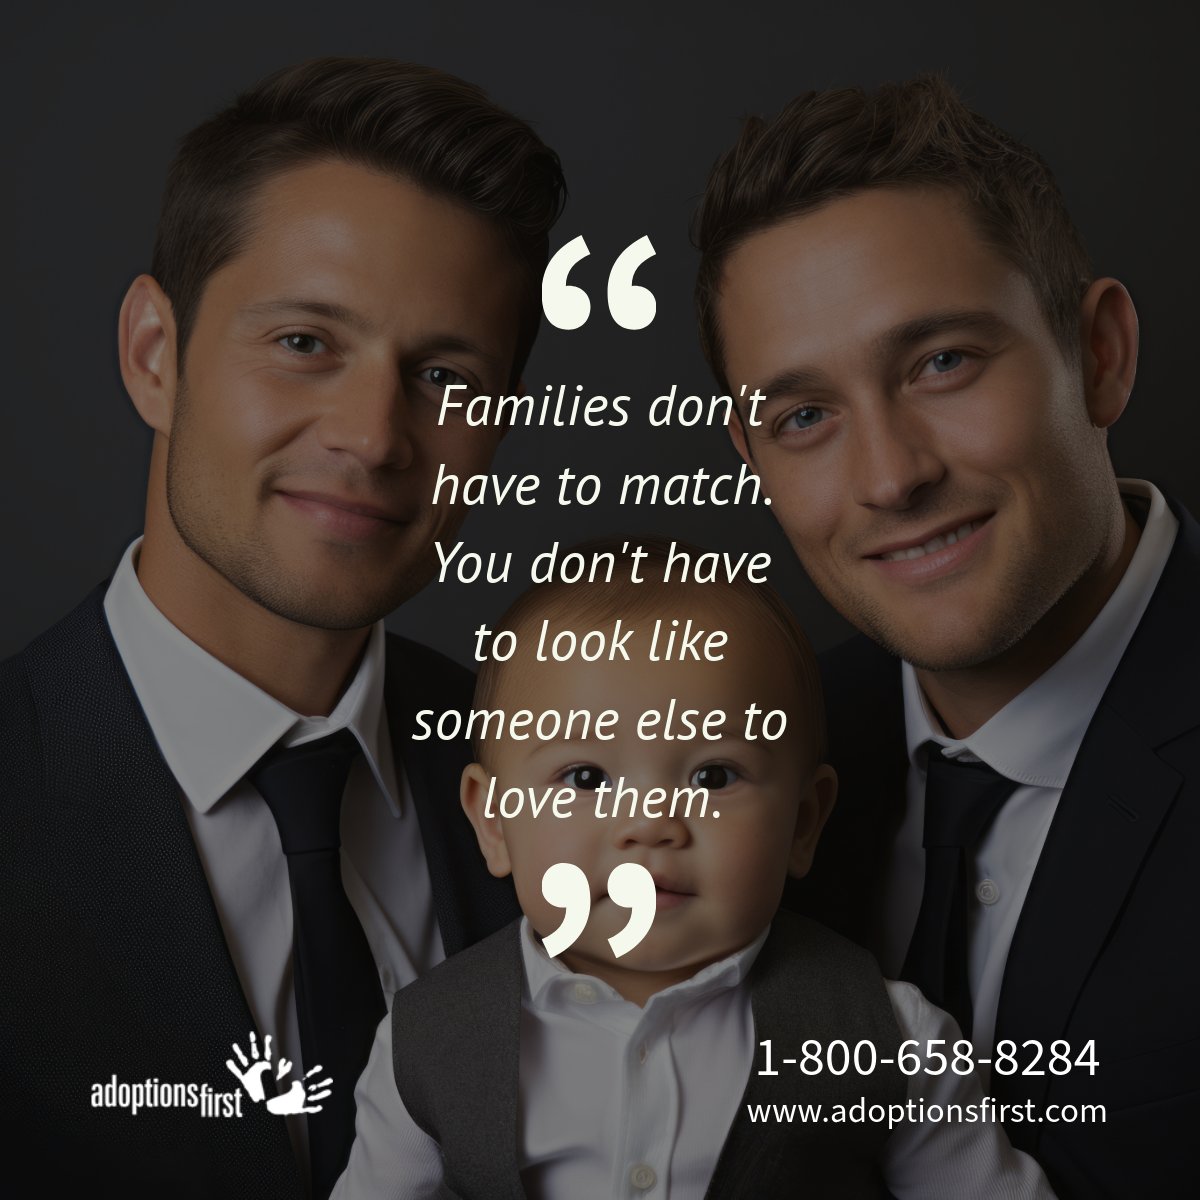 'Families don't have to match. You don't have to look like someone else to love them.' ✨
Learn more about our adoption process at adoptionsfirst.com
#adoption #adoptionplan #unplannedpregnancy #birthmomstrong #adoptionislove #openadoption  #adoptionrocks #lovemakesafamily